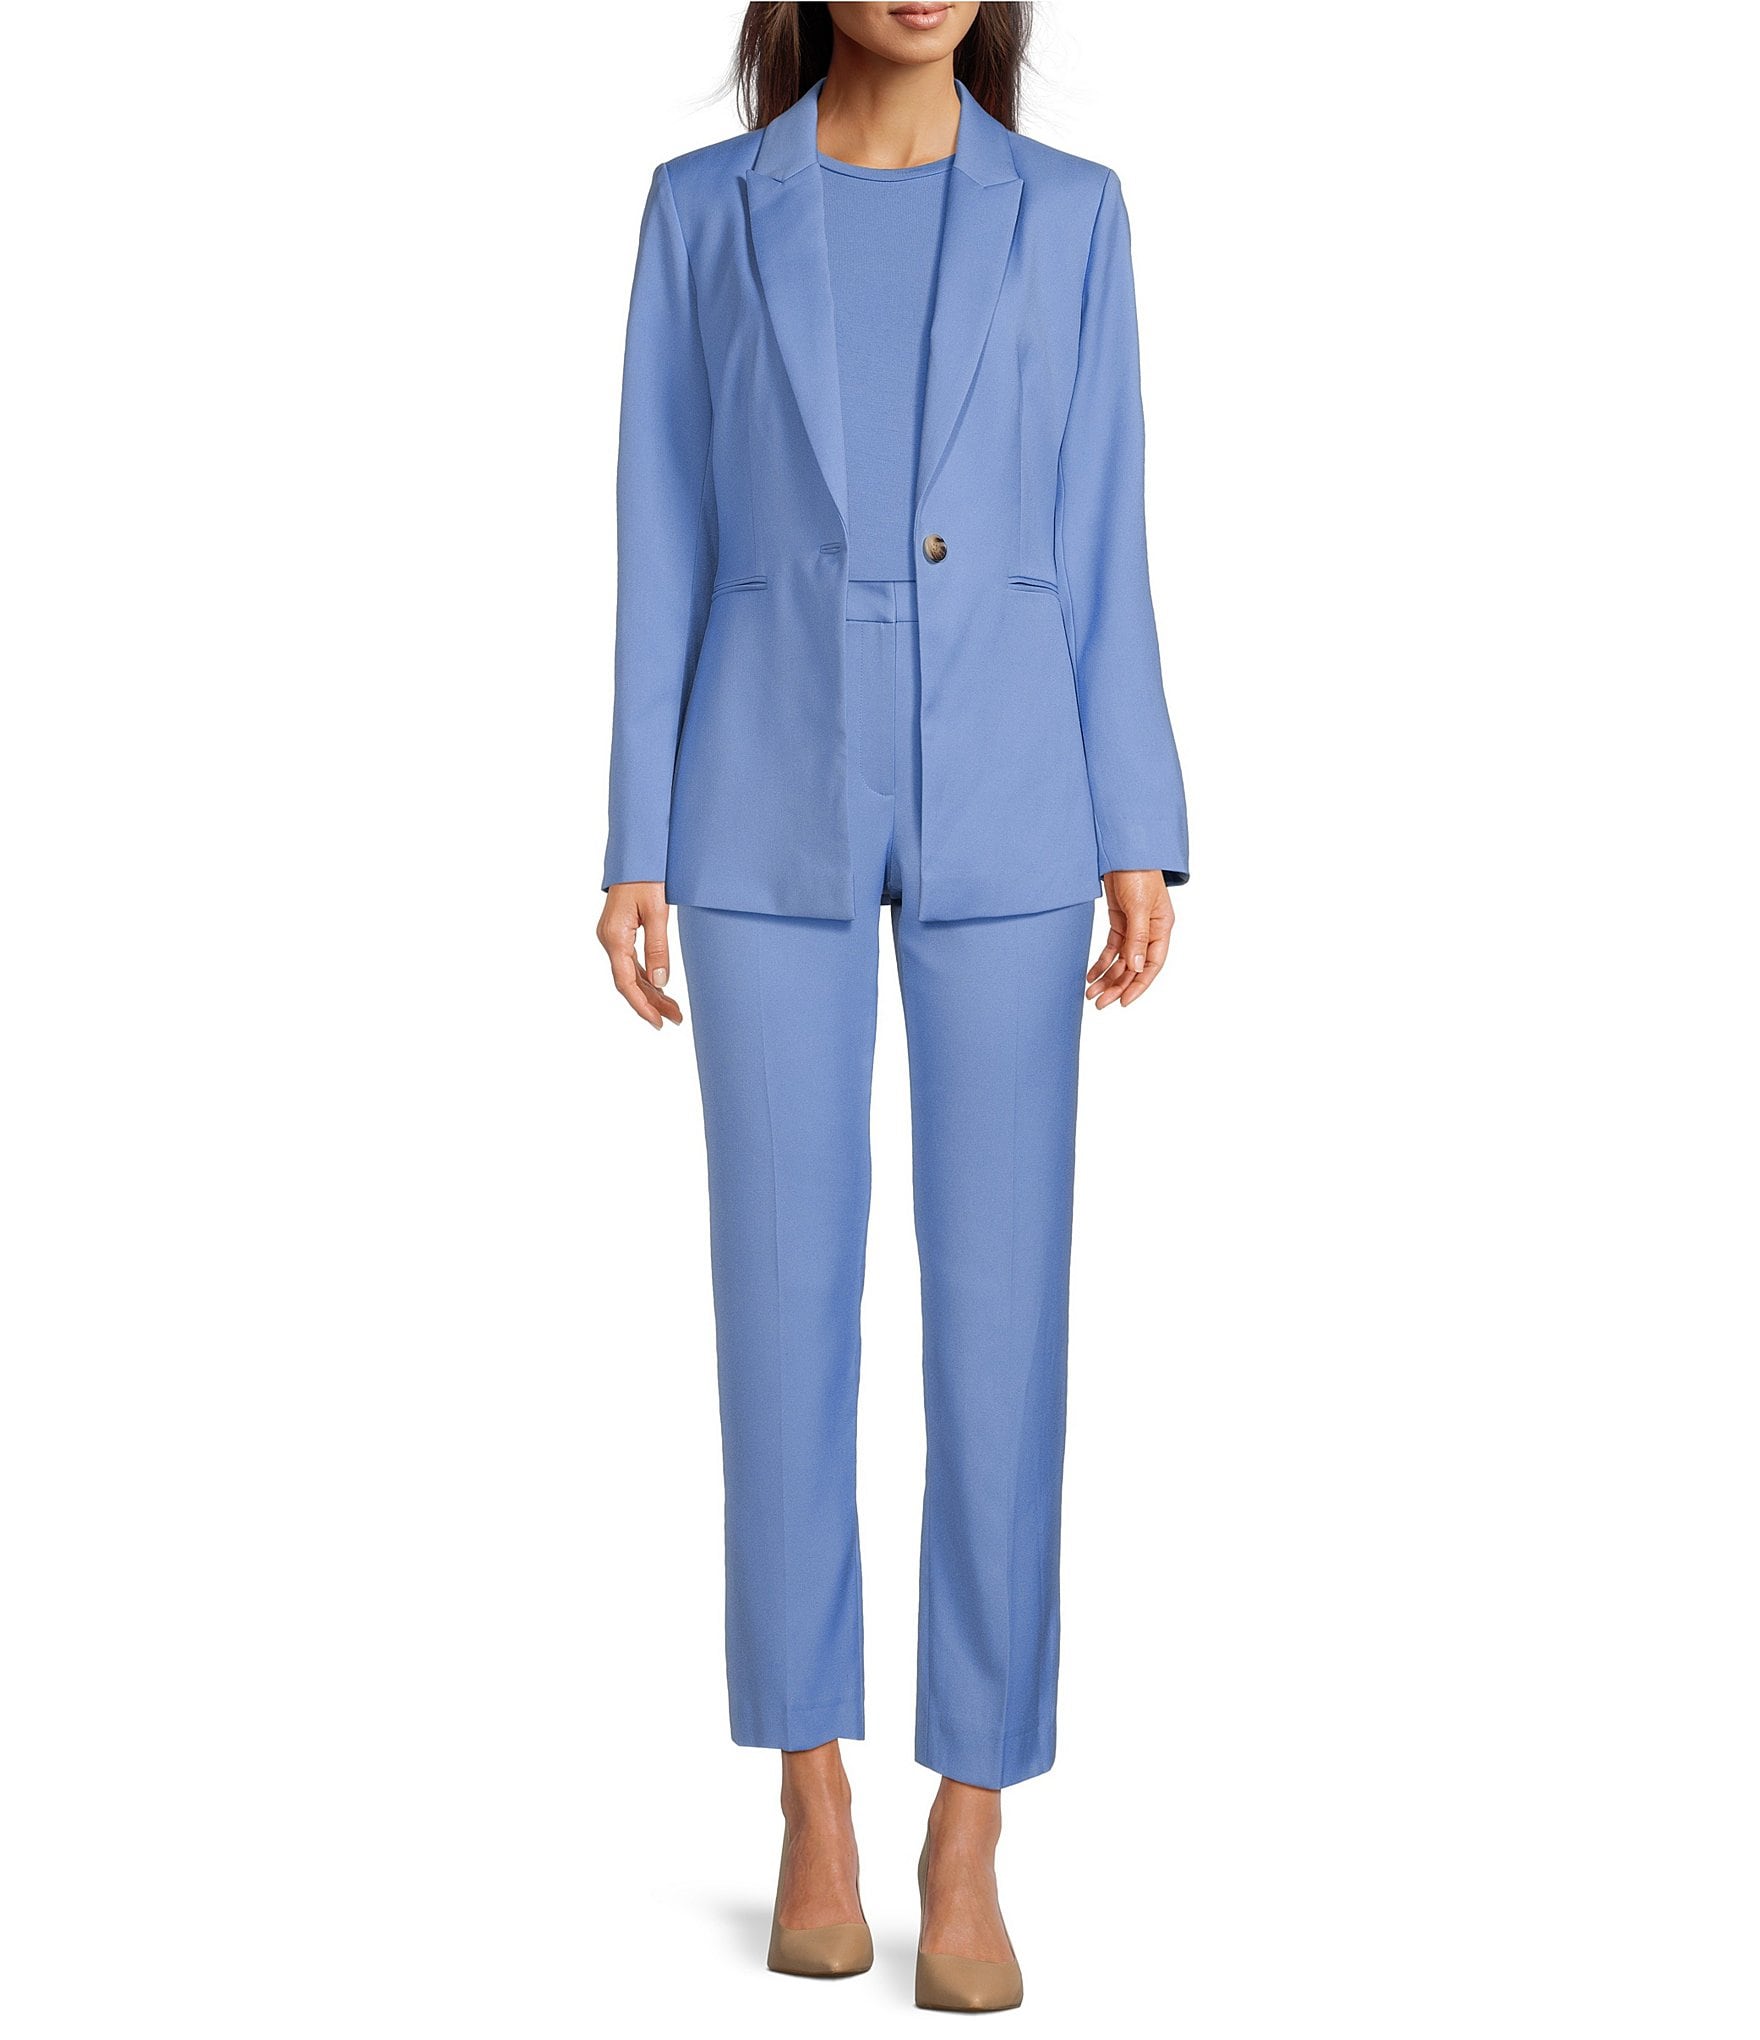 One-Button Blazer and Ankle-Tie Pants Set – Anchor Blue Jeans